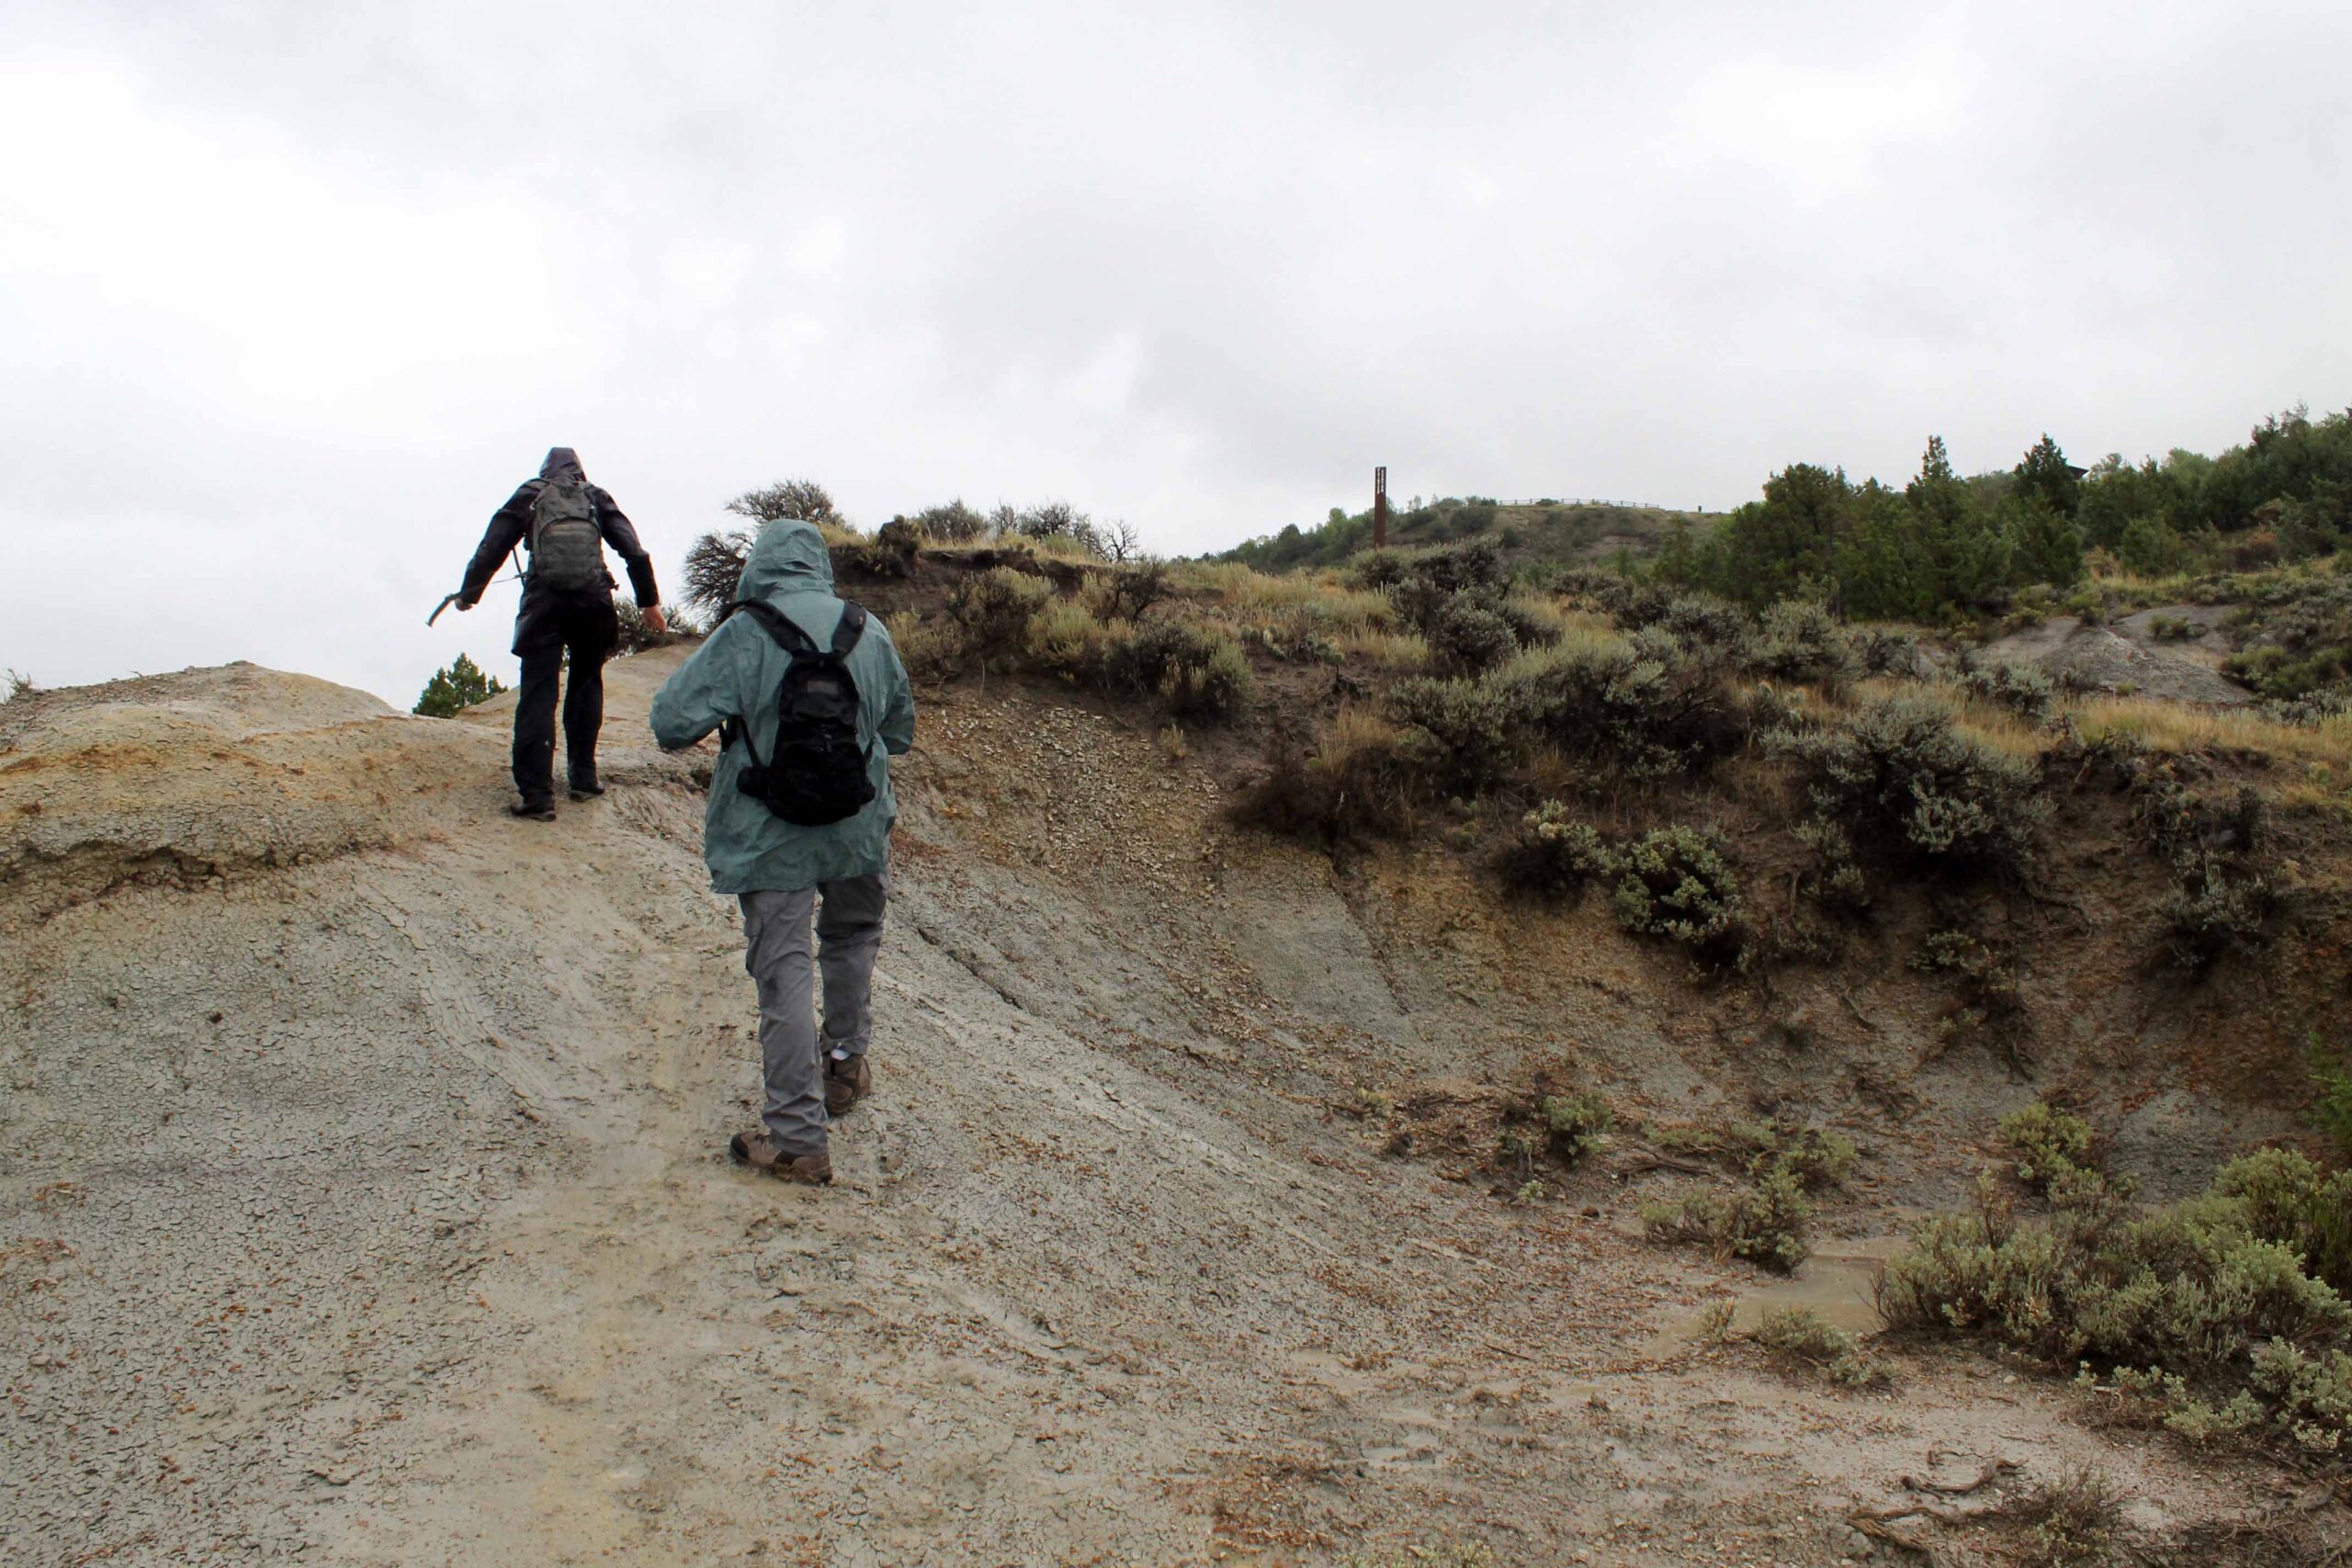 Hikers teetering up a muddy trail in the badlands of Theodore Roosevelt National Park